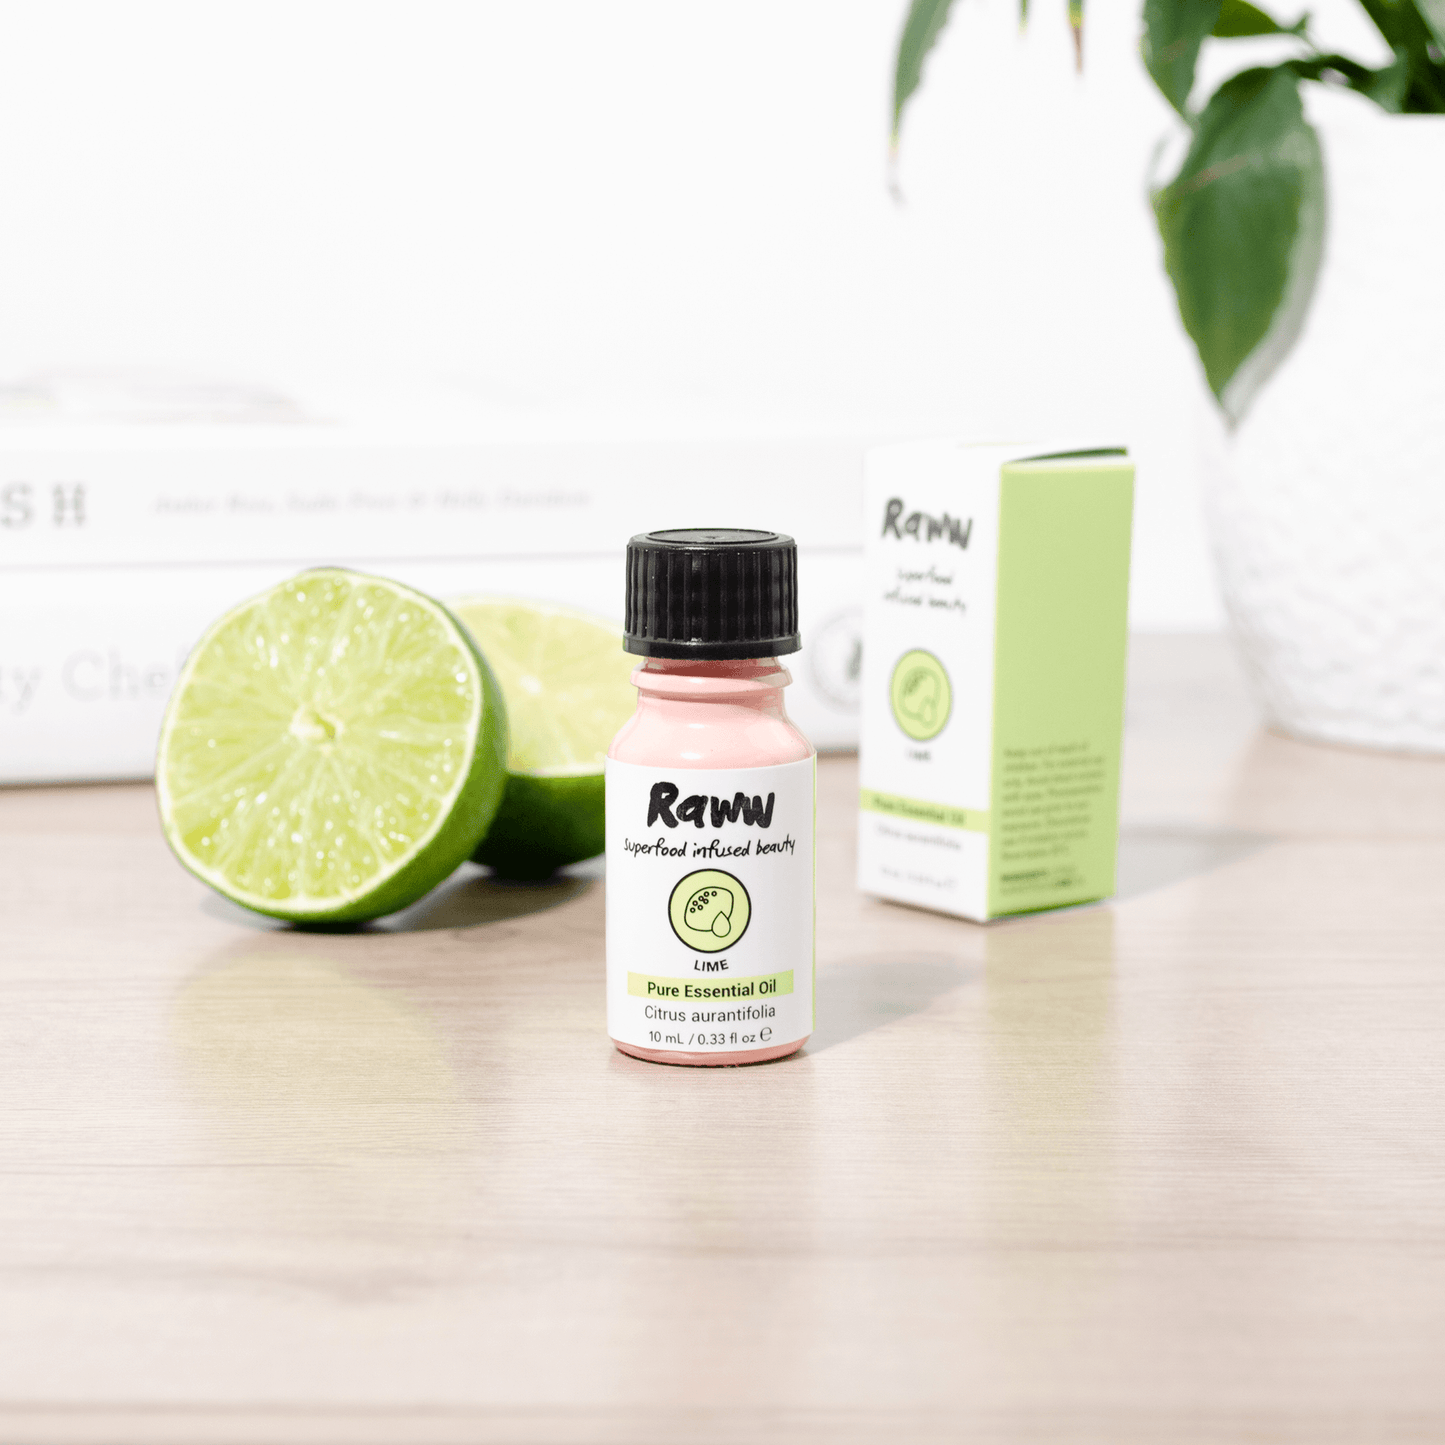 Lime Pure Essential Oil | RAWW Cosmetics | Lifestyle 01